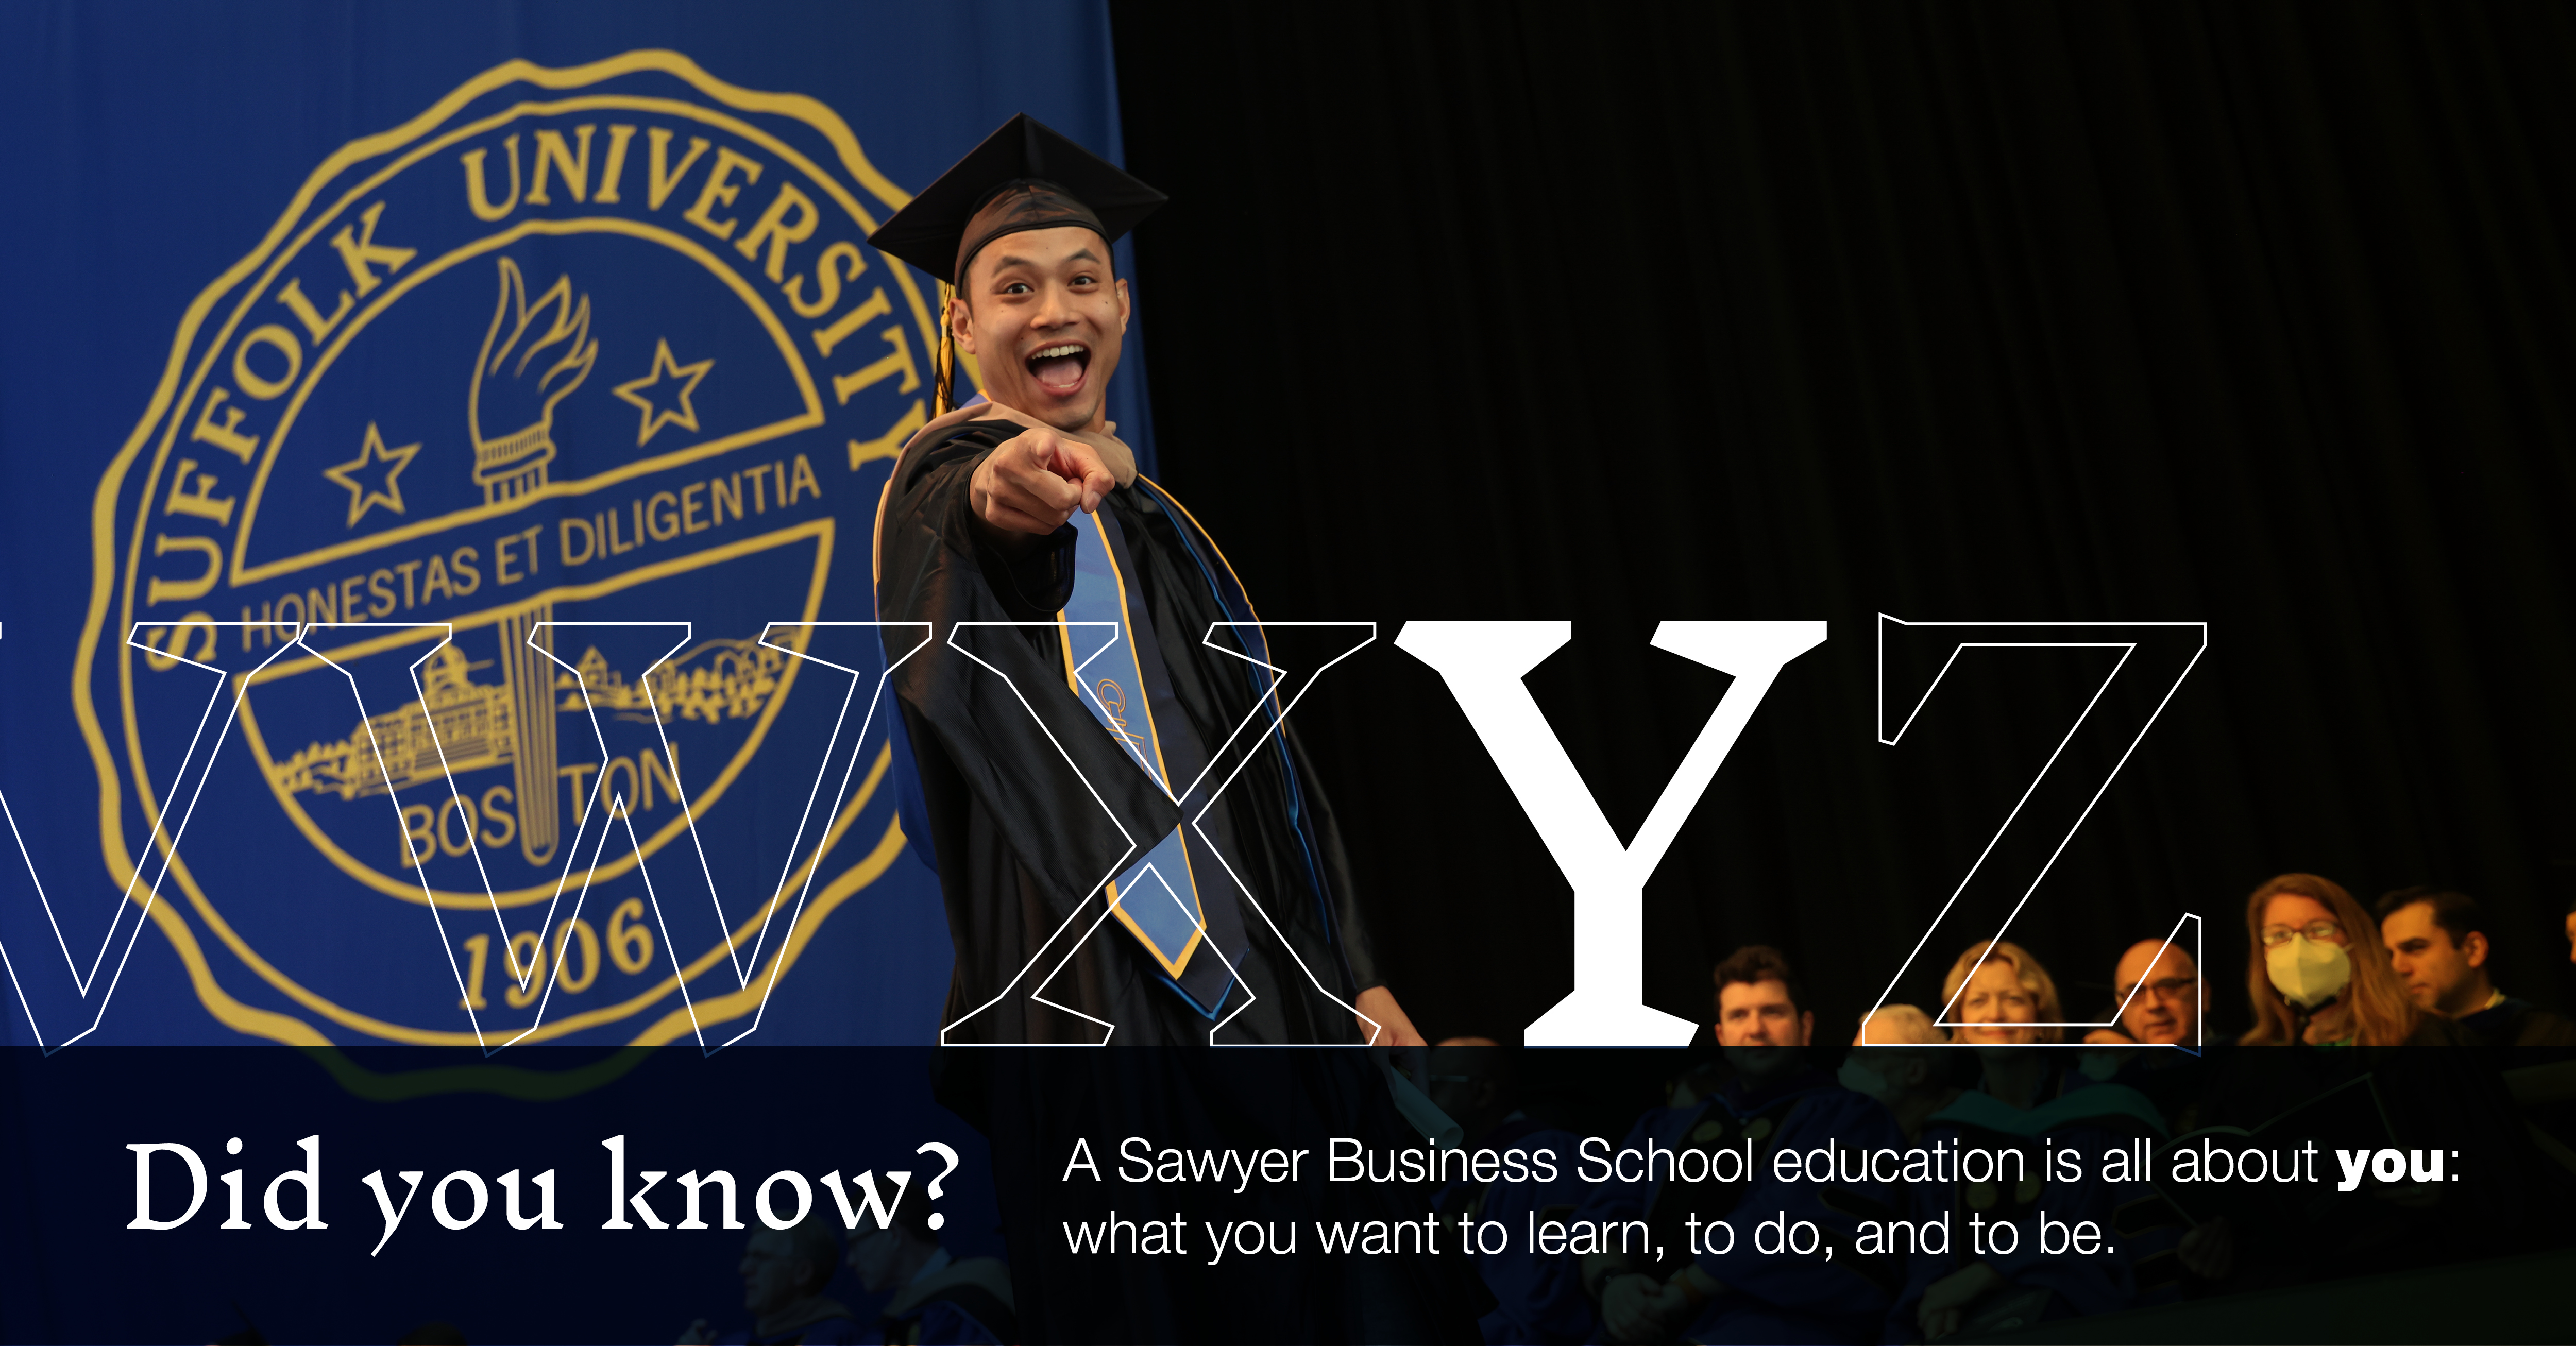 Y: [image of graduate pointing at the camera from the Commencement stage] Did you know a Sawyer Business School education is all about you: what you want to learn, to do, and to be.